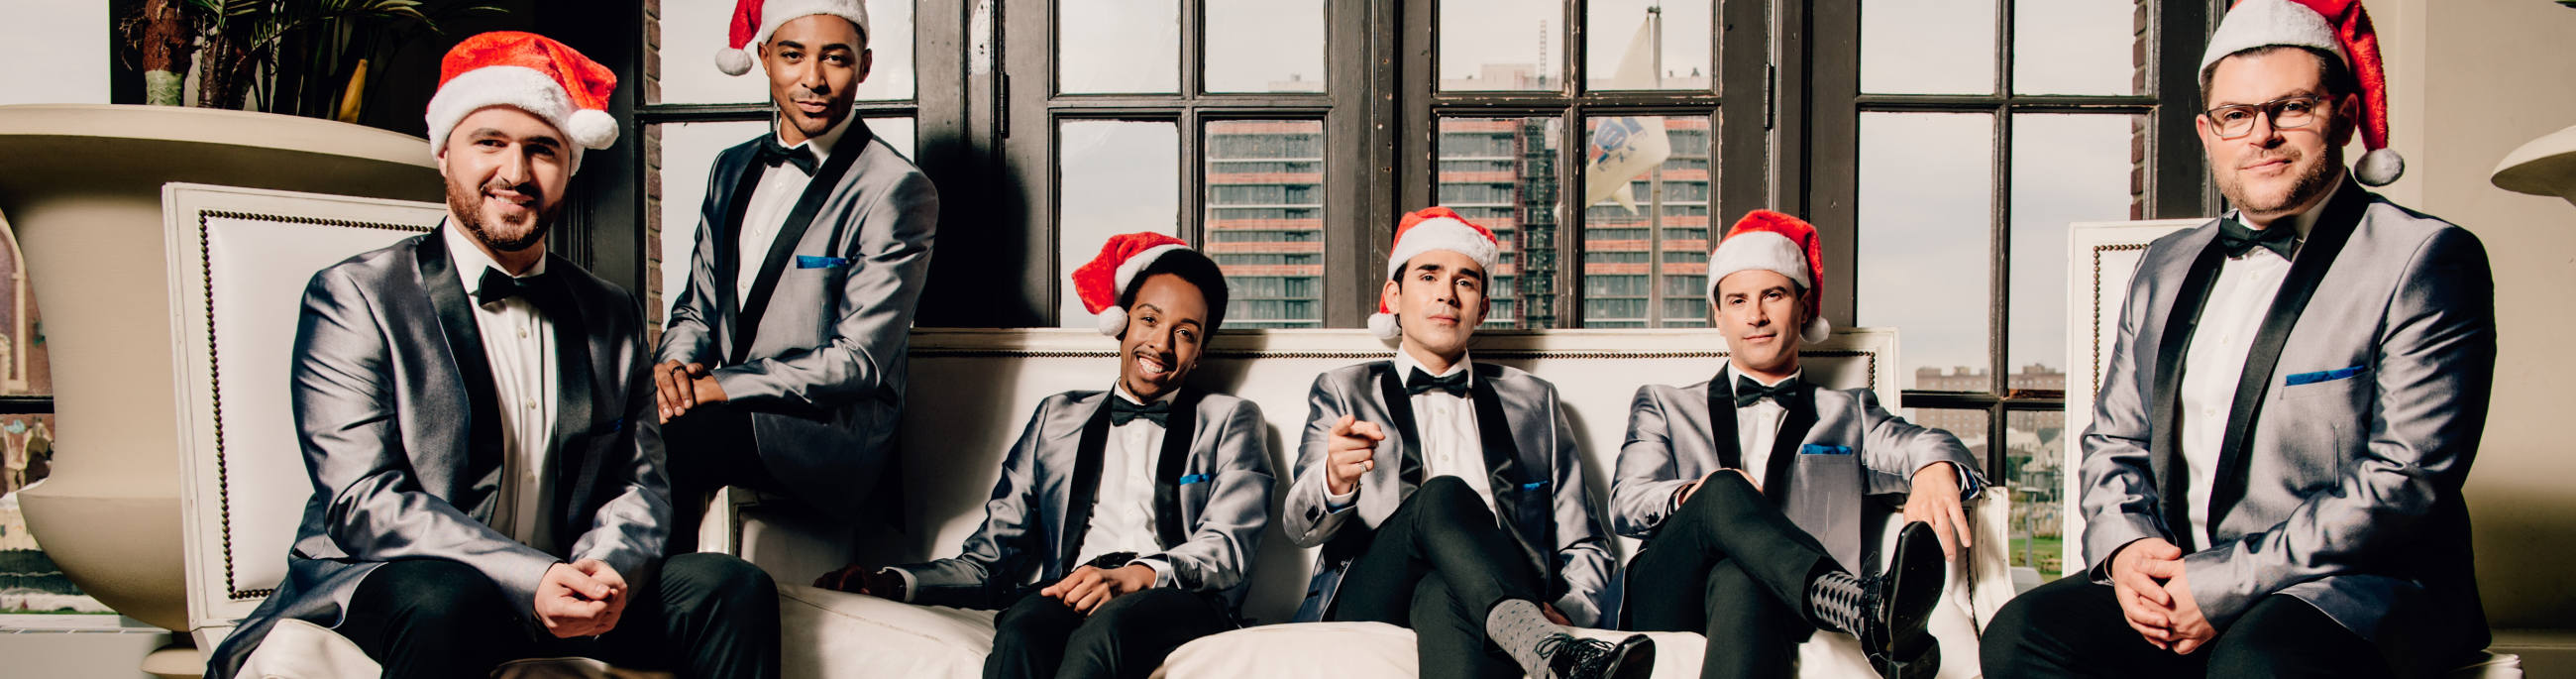 Six men dressed in black and gray suits and wearing santa hats, sitting on a couch looking at the camera